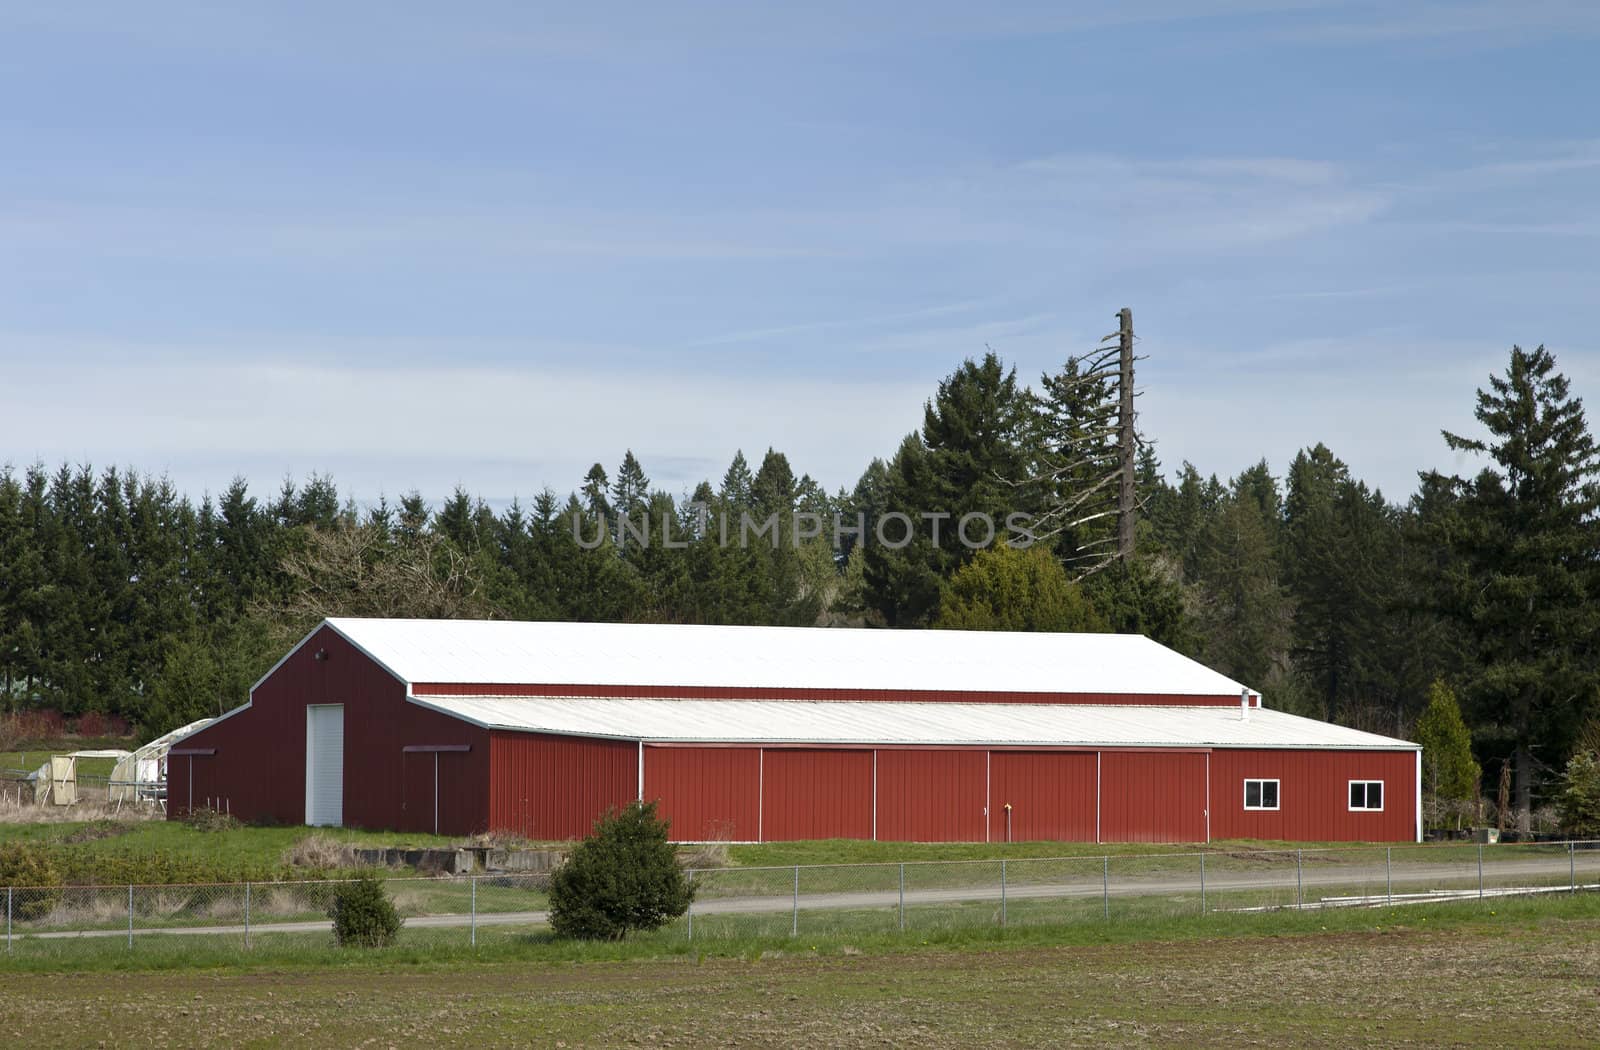 Large red warehouse in rural Oregon.